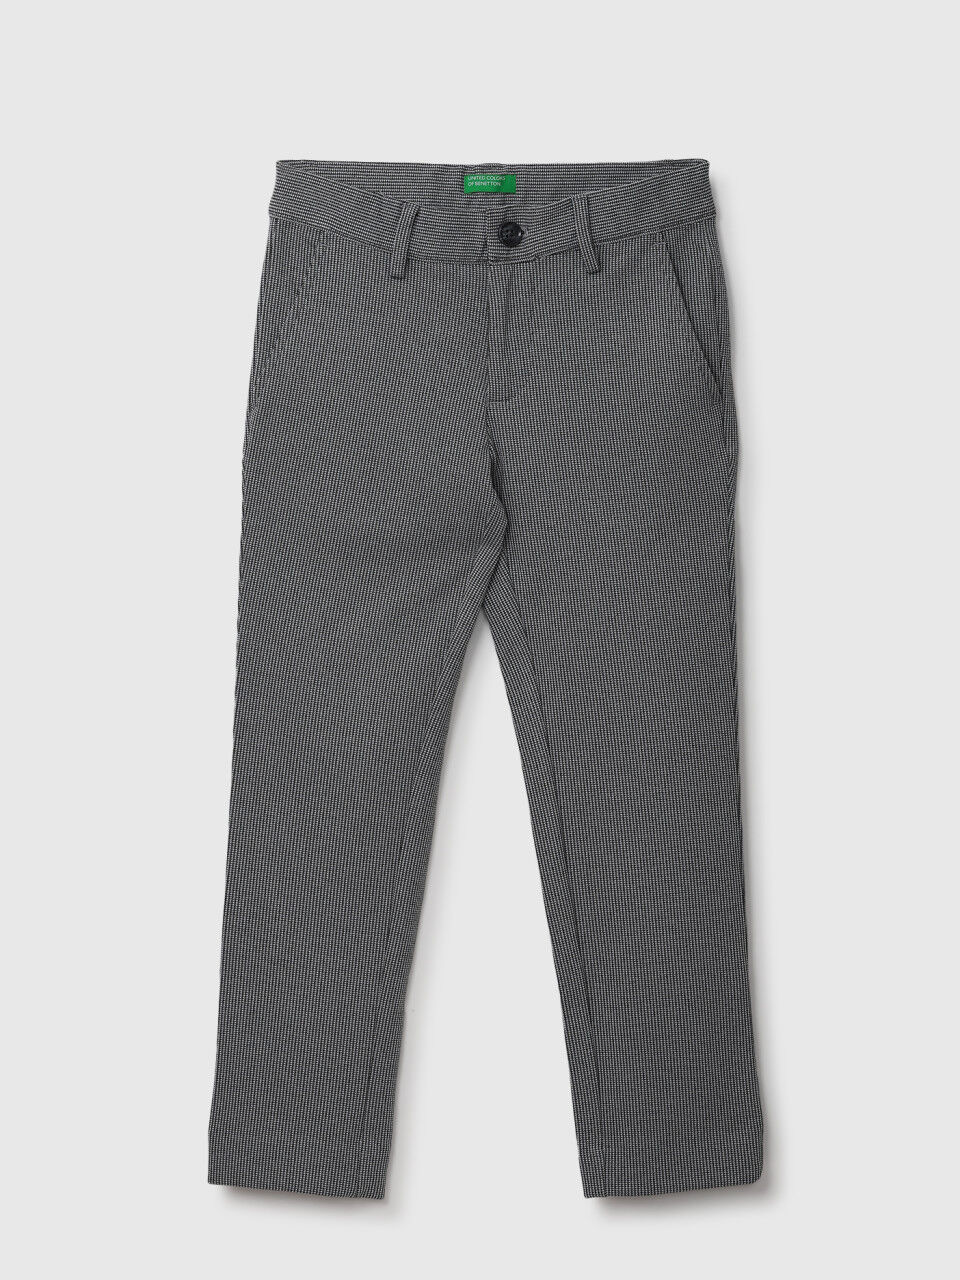 United Colors Of Benetton Grey Knit Trousers